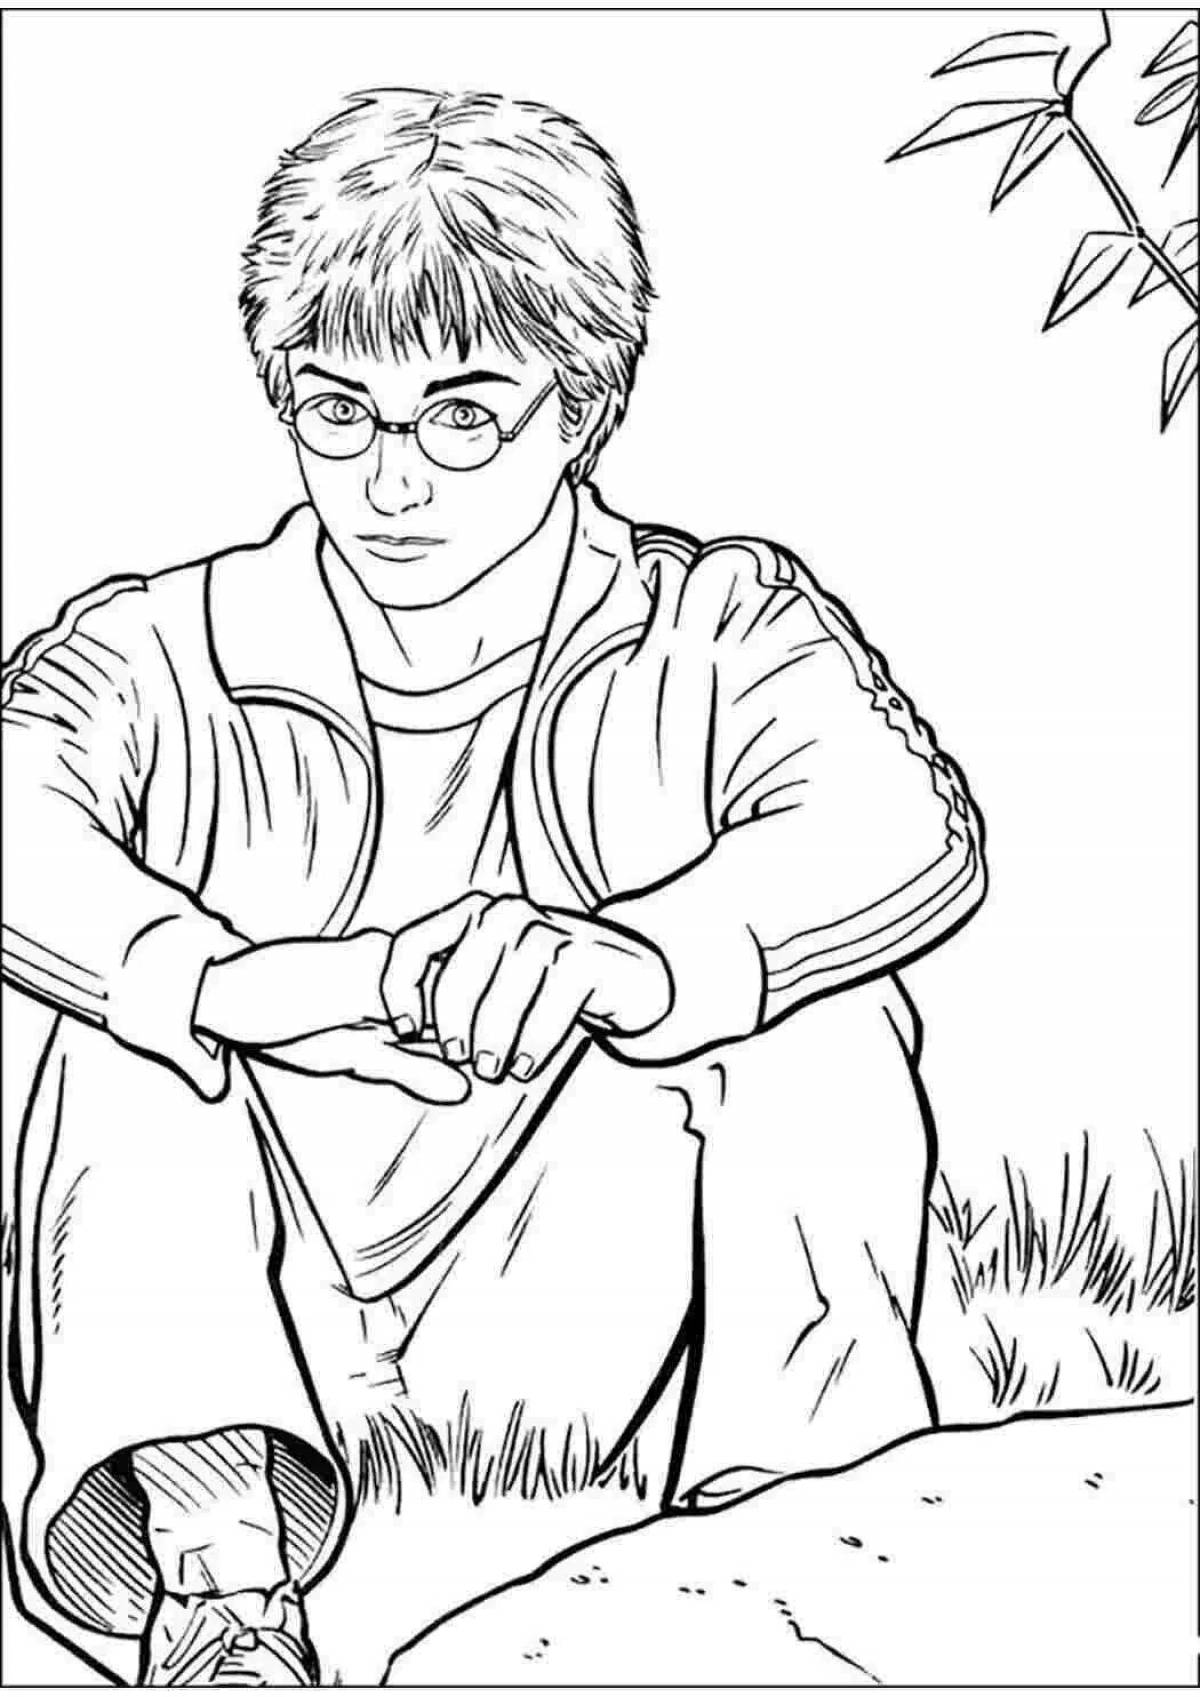 Fancy harry potter coloring book